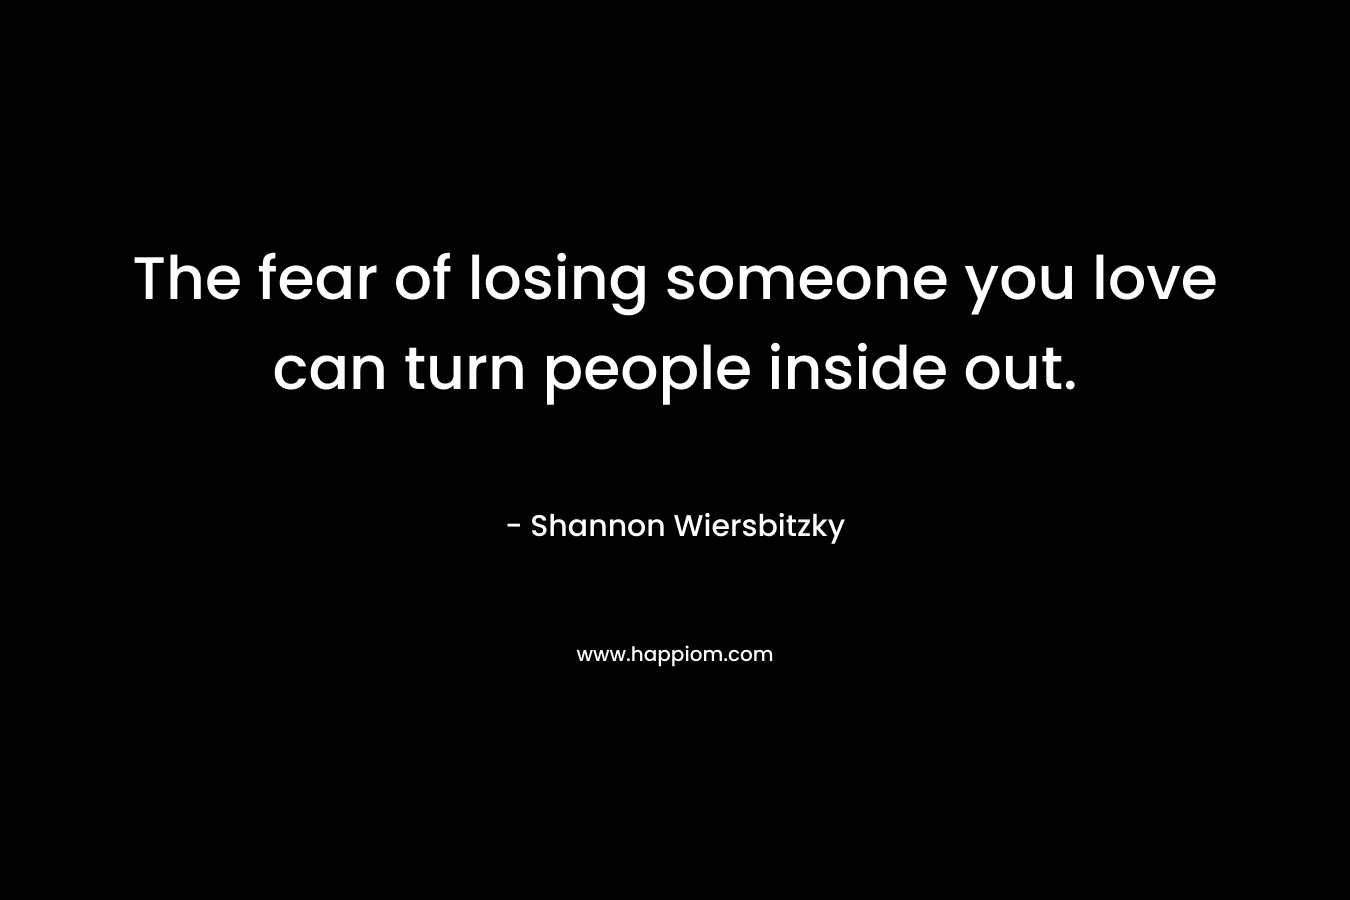 The fear of losing someone you love can turn people inside out.